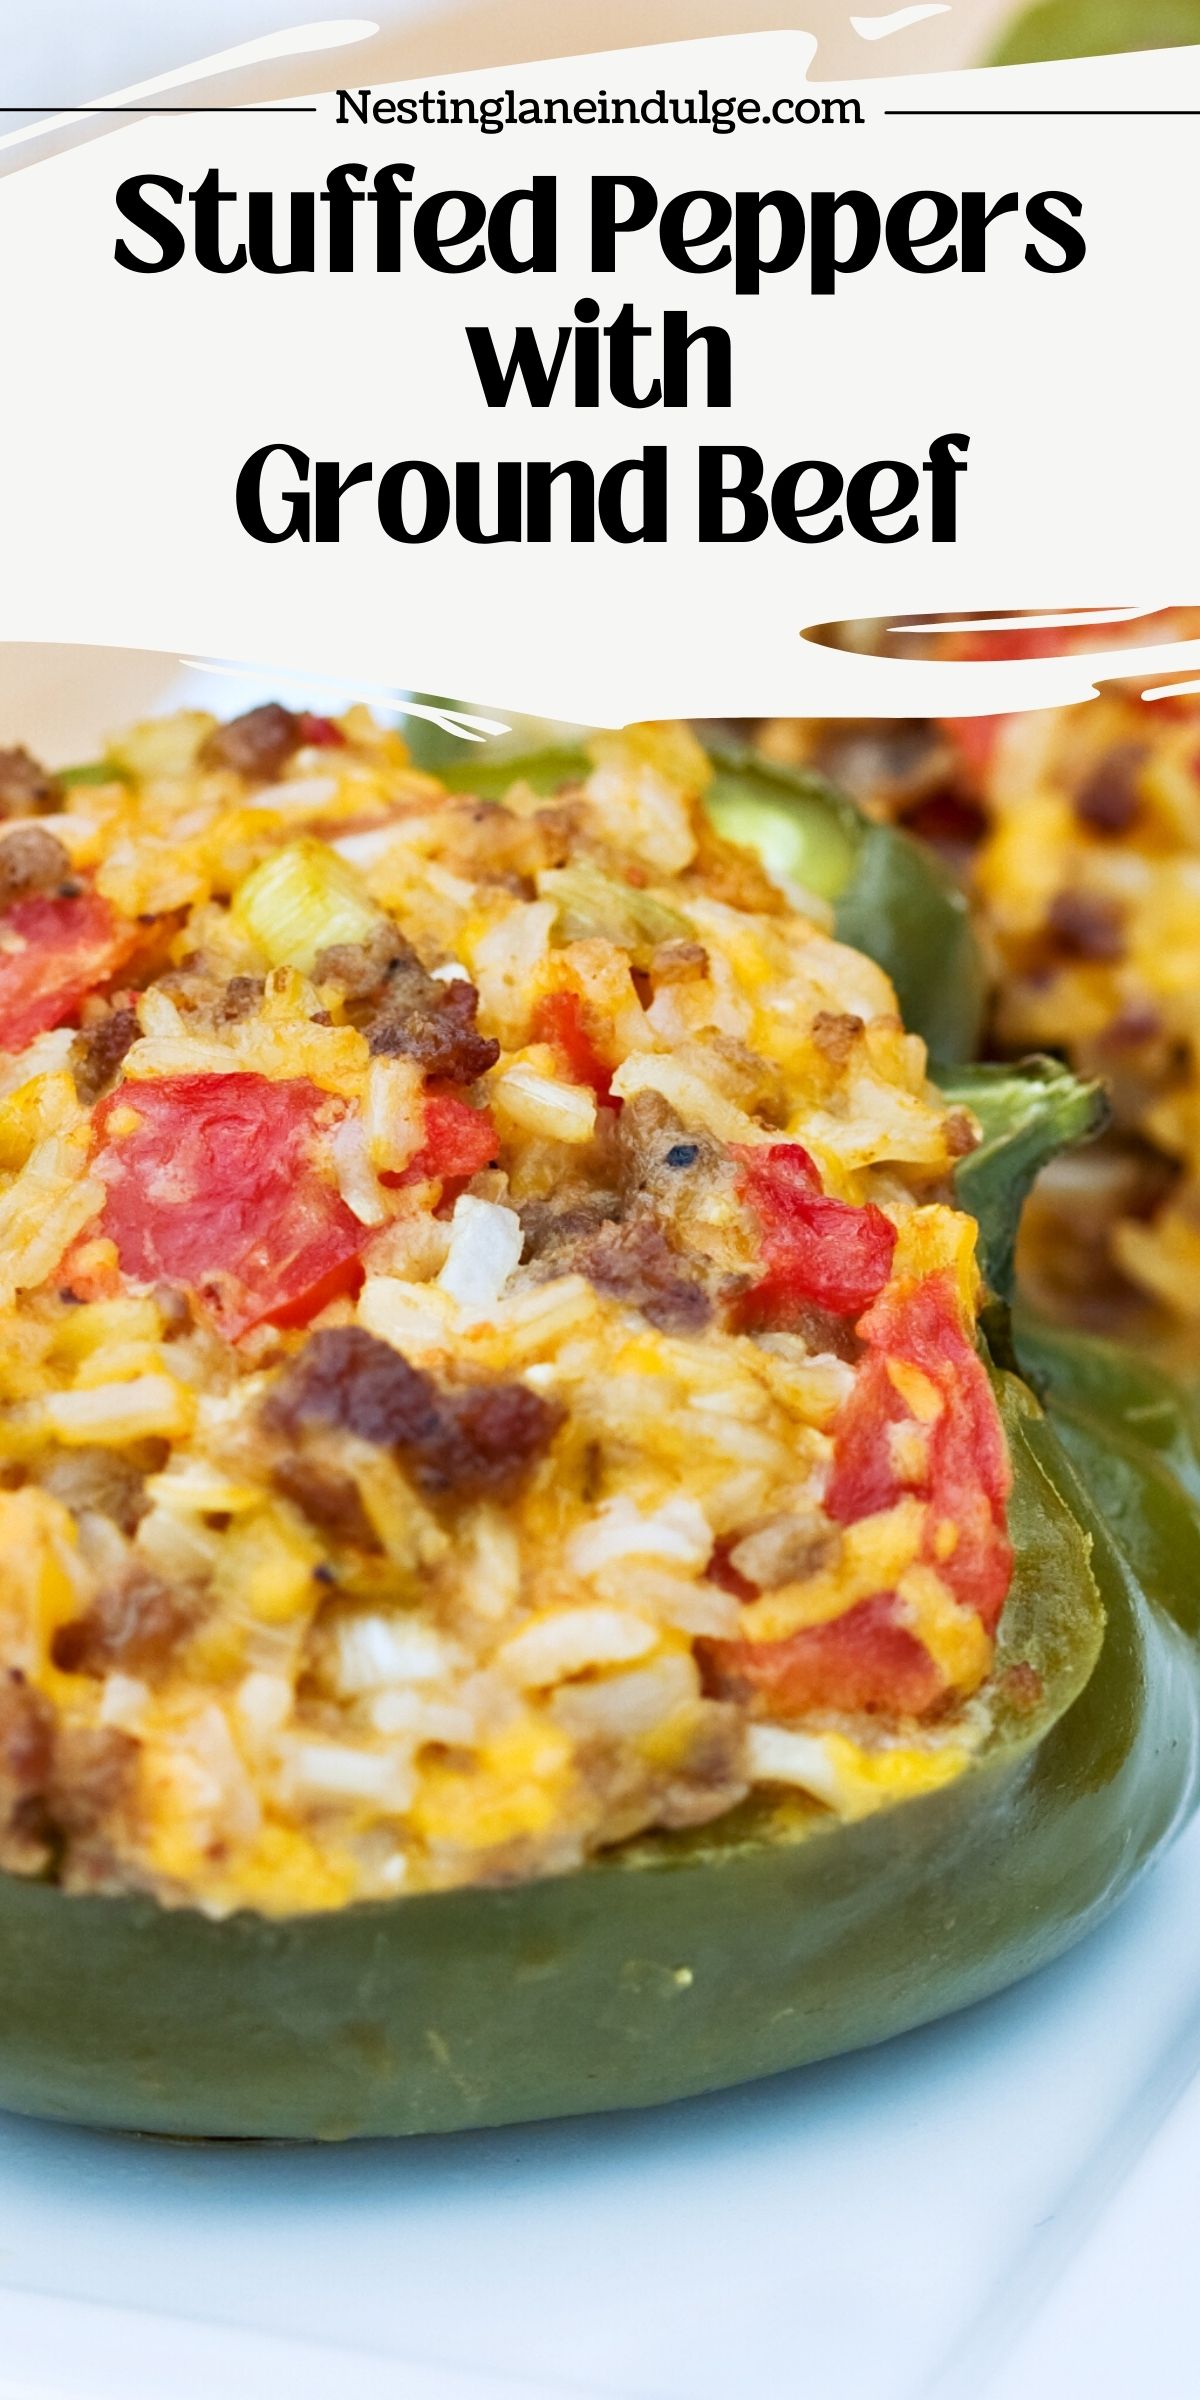 Stuffed Peppers with Ground Beef Graphic.